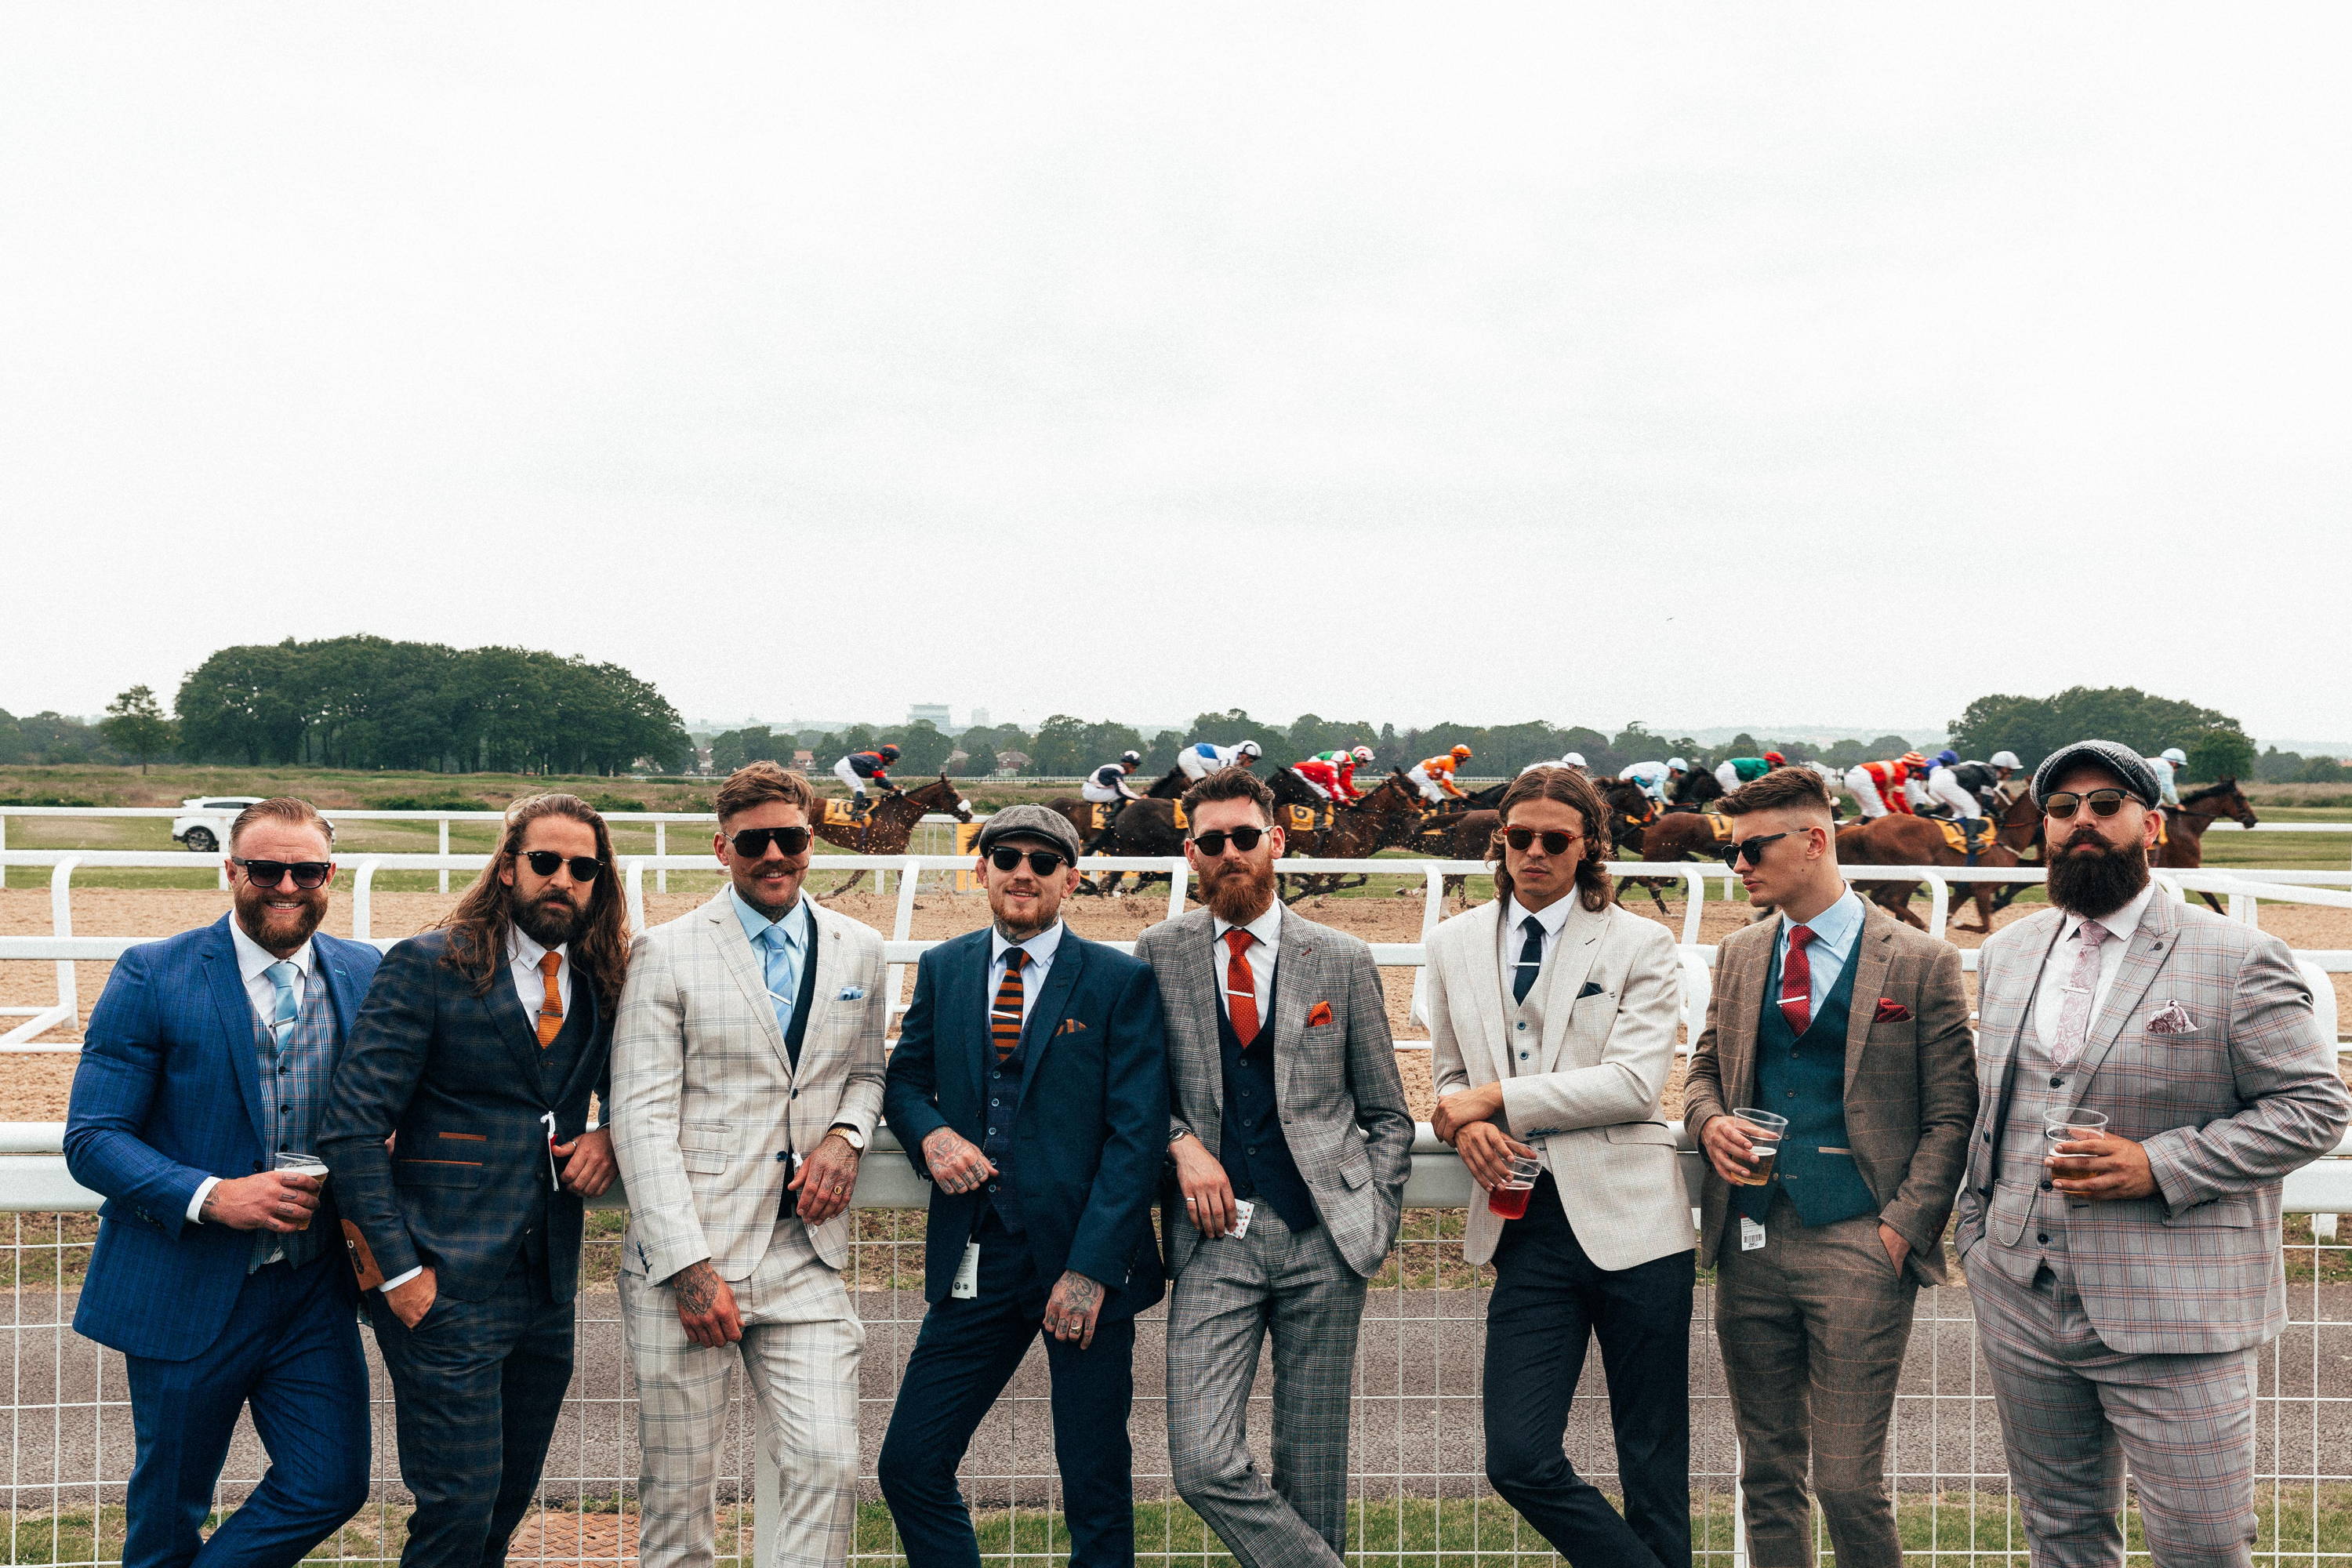 men wearing suits at the horse races track